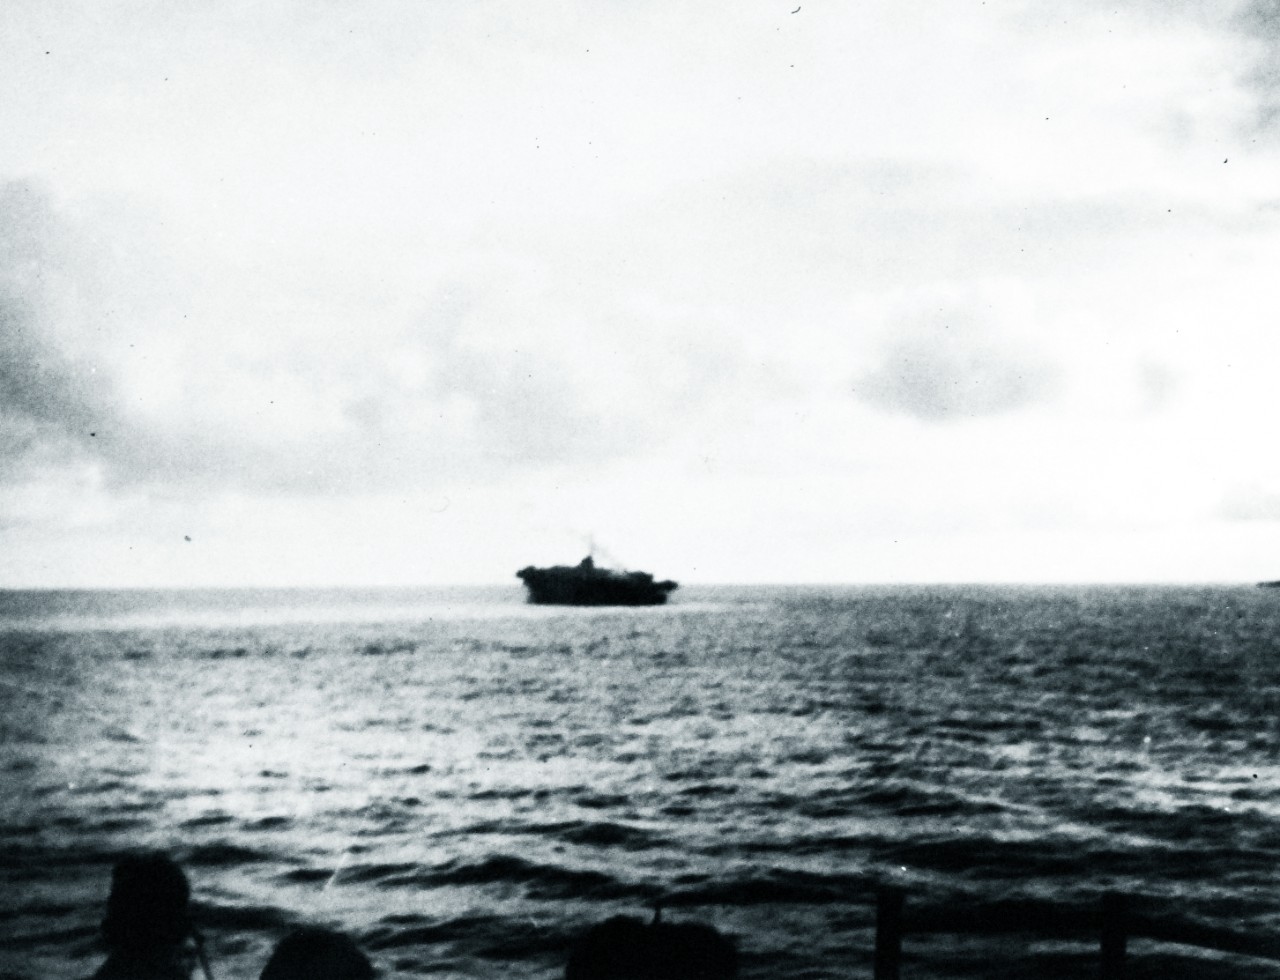 <p>80-G-49302: Loss of USS Block Island (CVE-21), May 29, 1944. USS Block Island (CVE-21) sinking by the stern, after being torpedoed by U-549 in the Eastern Atlantic on 29 May 1944.&nbsp;</p>
